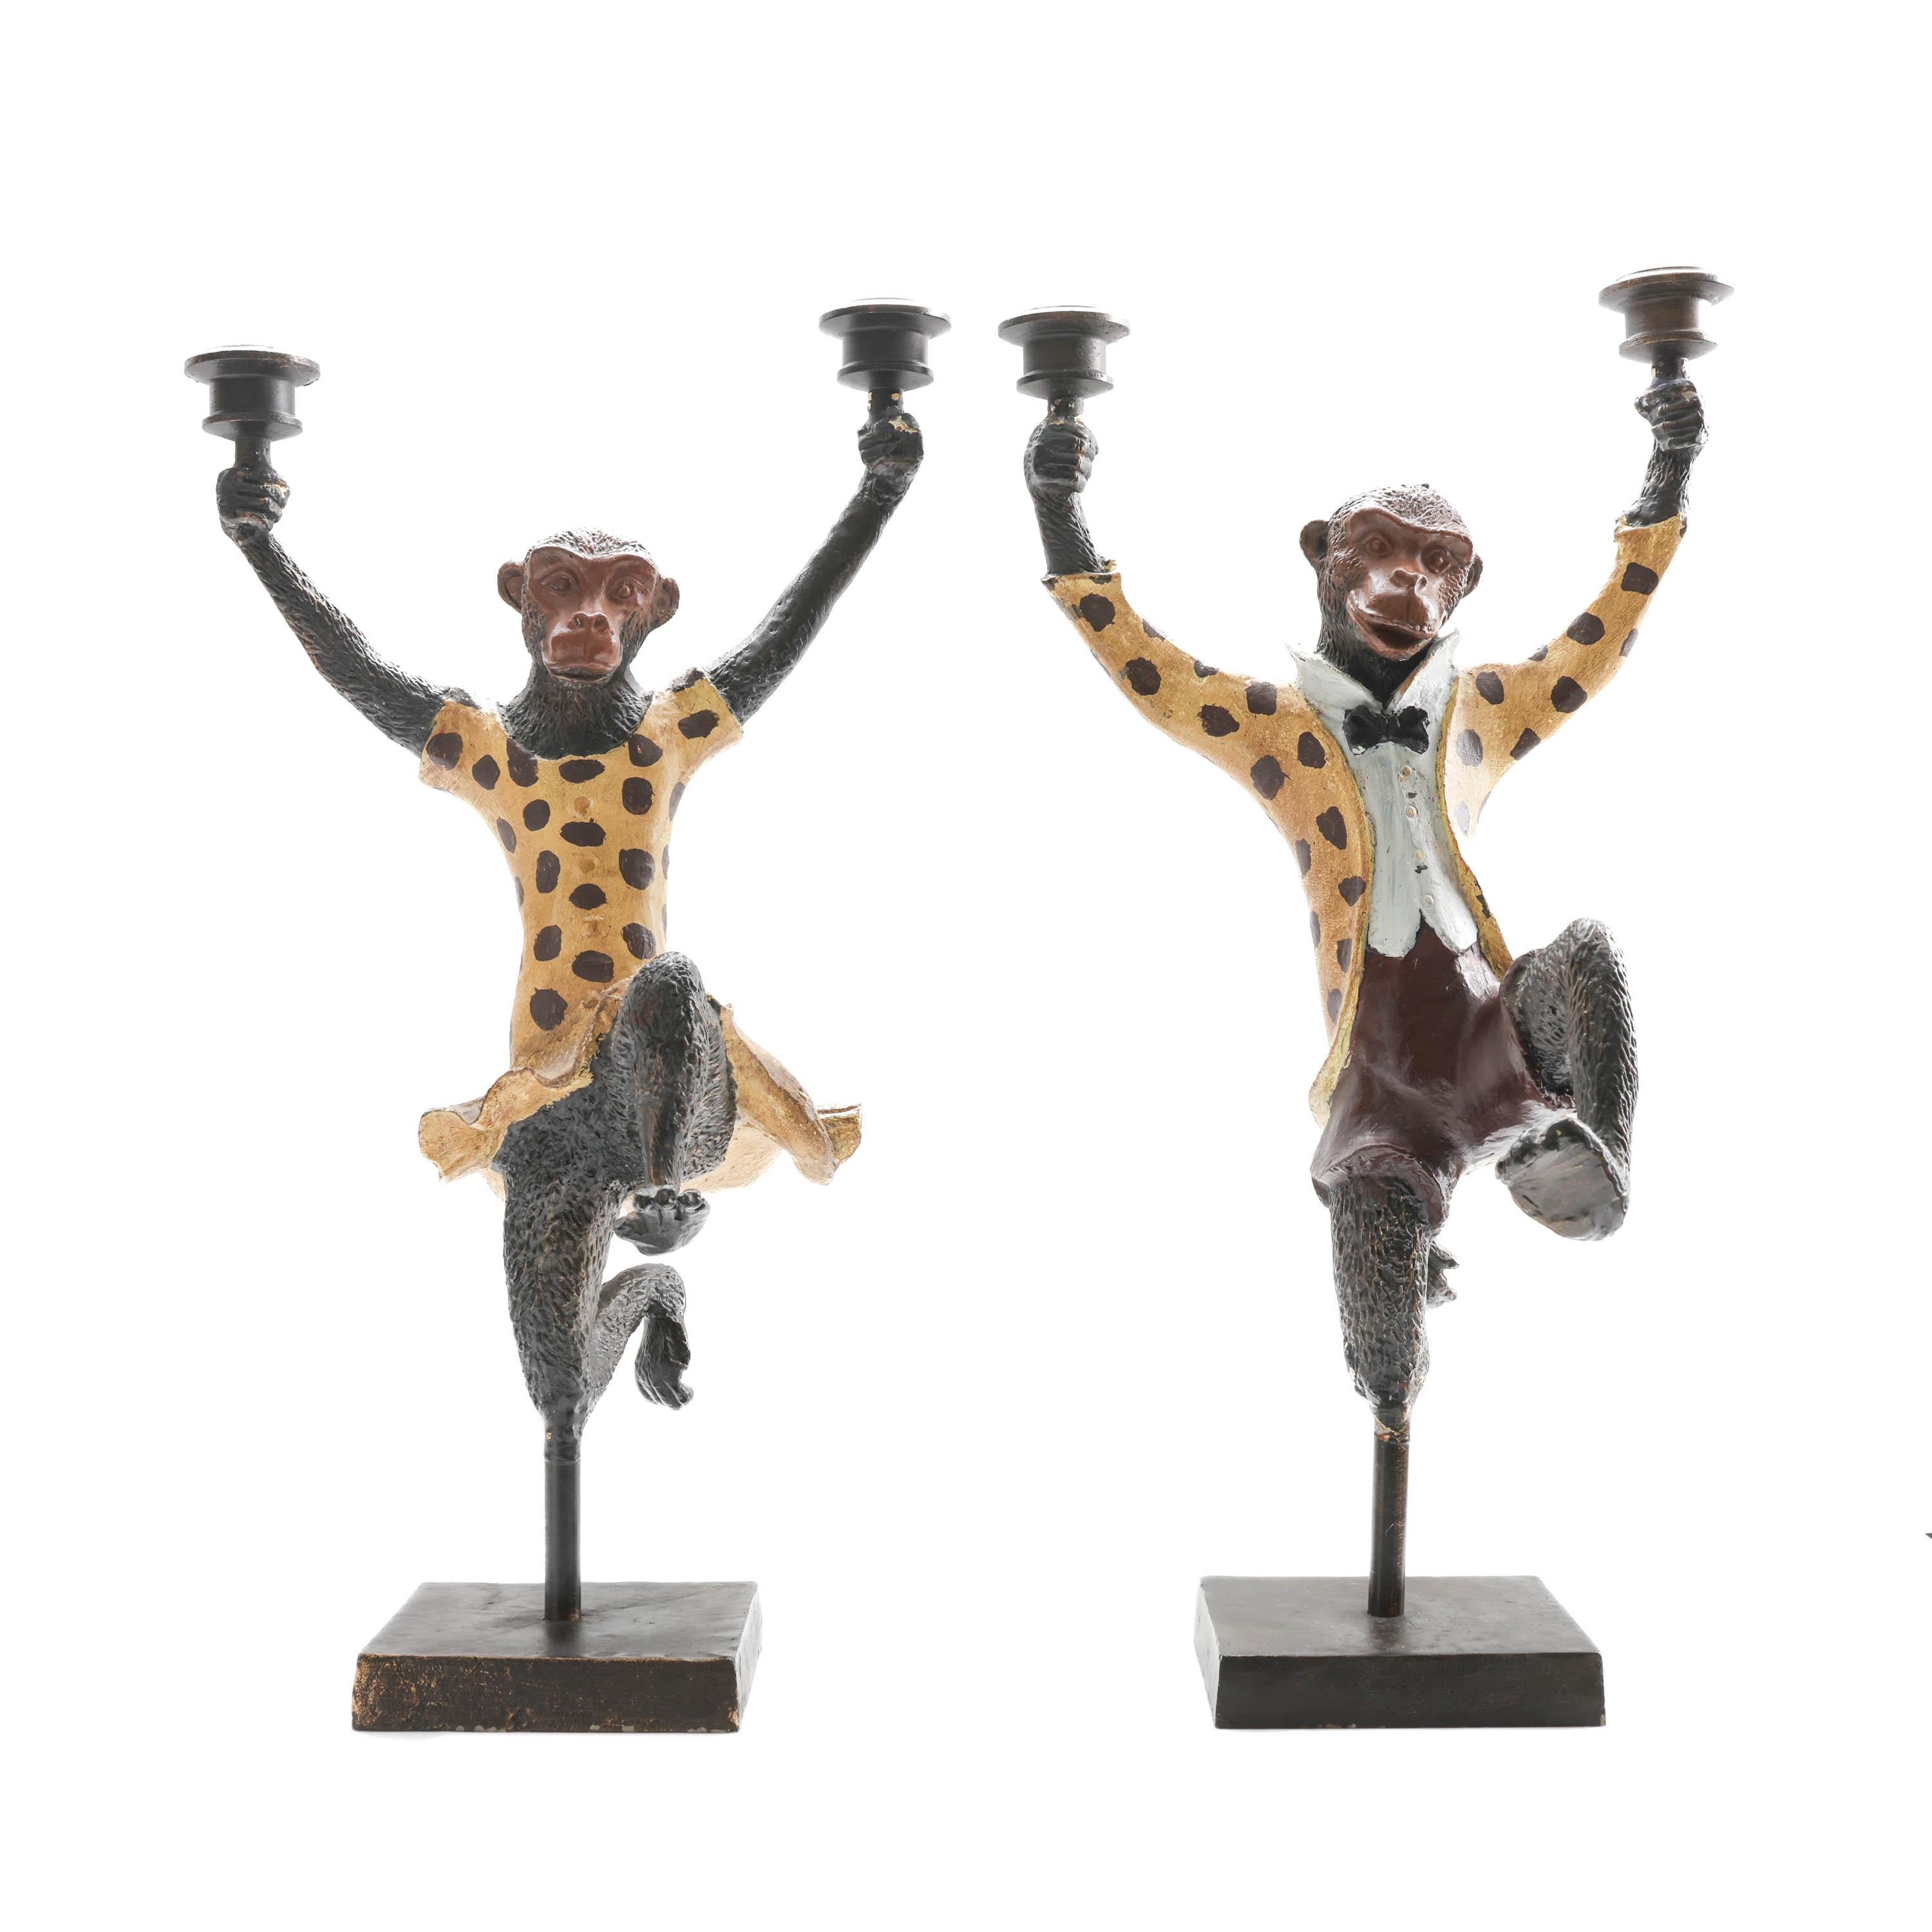 Originally sold by Scully & Scully, this is a fascinating and eccentric pair of substantial iron dancing monkey sculpture candelabras. The pair is composed of a lady monkey and a gentleman monkey; she wears a yellow and black polka dot dress; he a